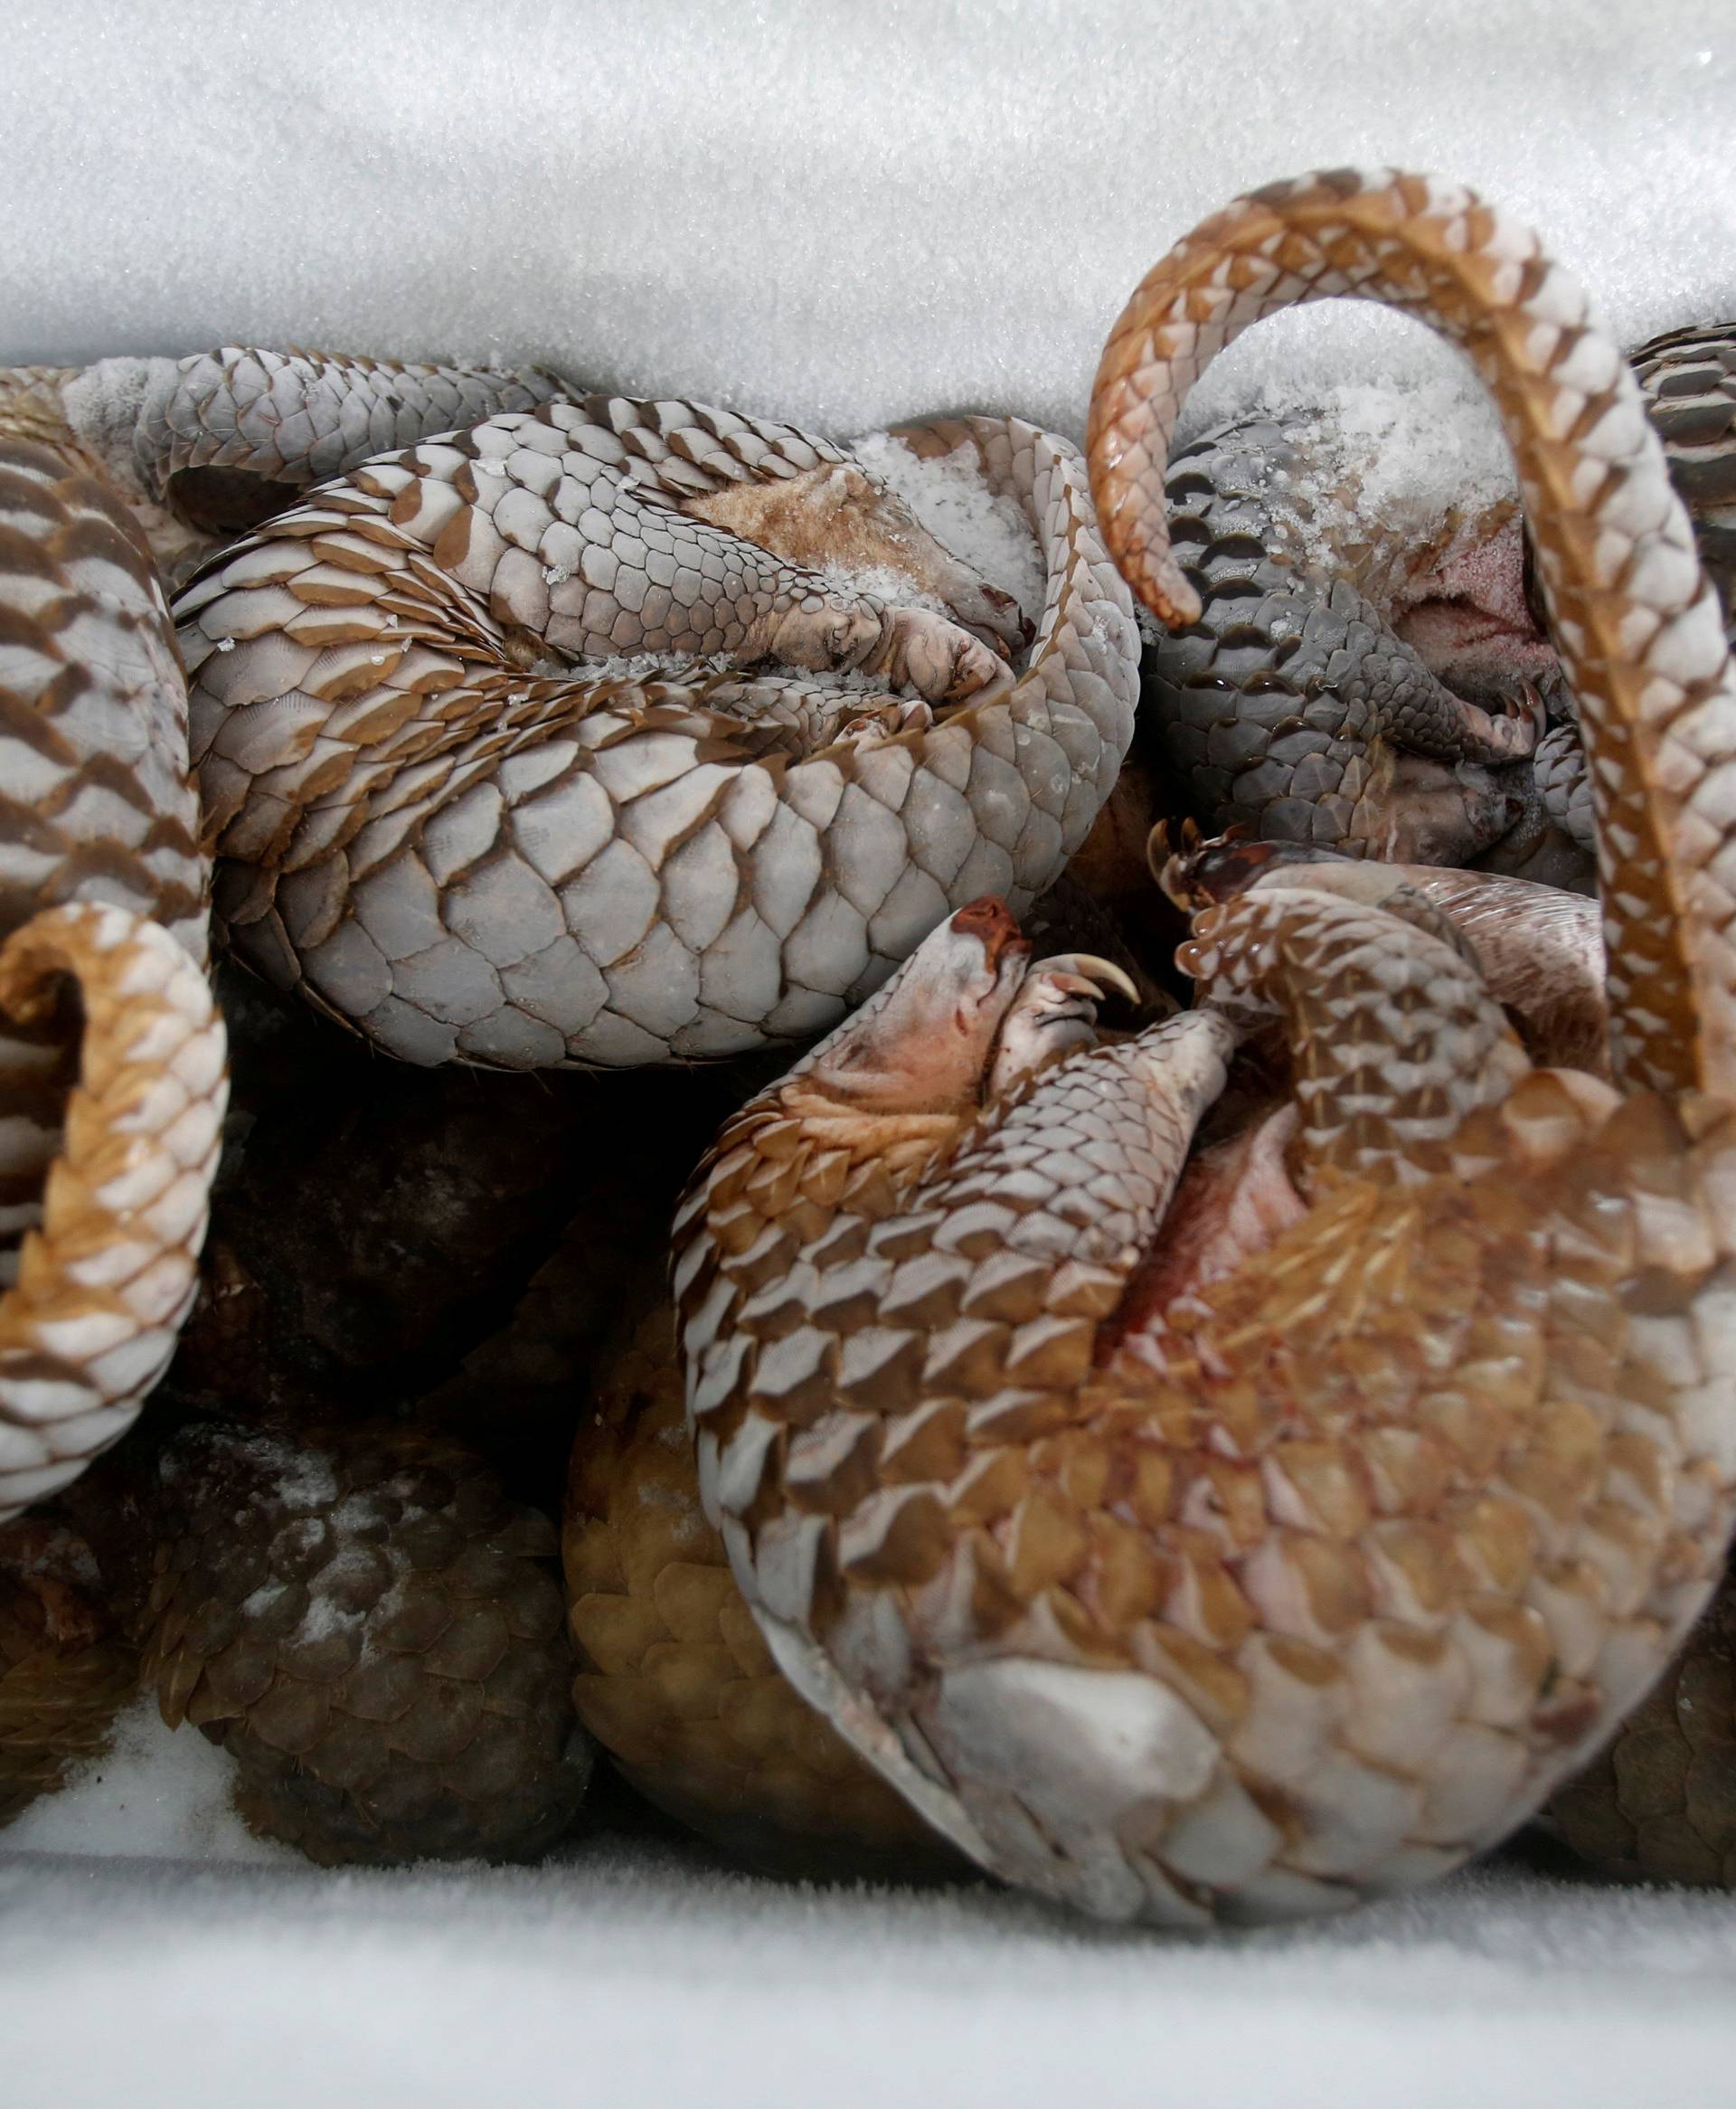 Frozen pangolins are seen at a wild animal rescue center in Hanoi, Vietnam